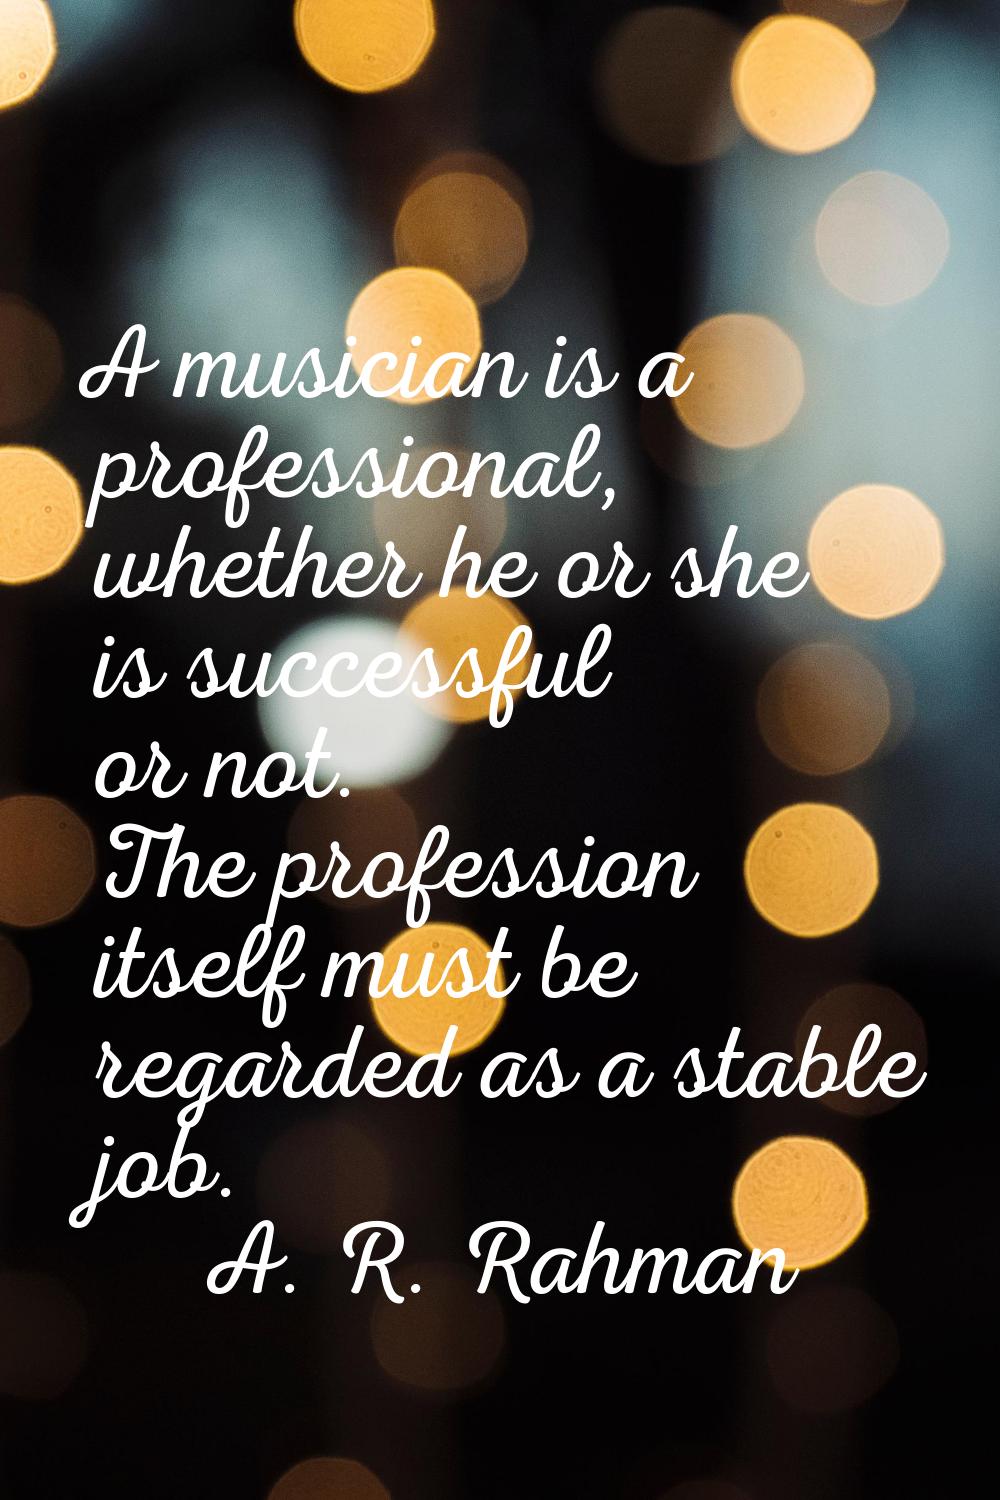 A musician is a professional, whether he or she is successful or not. The profession itself must be